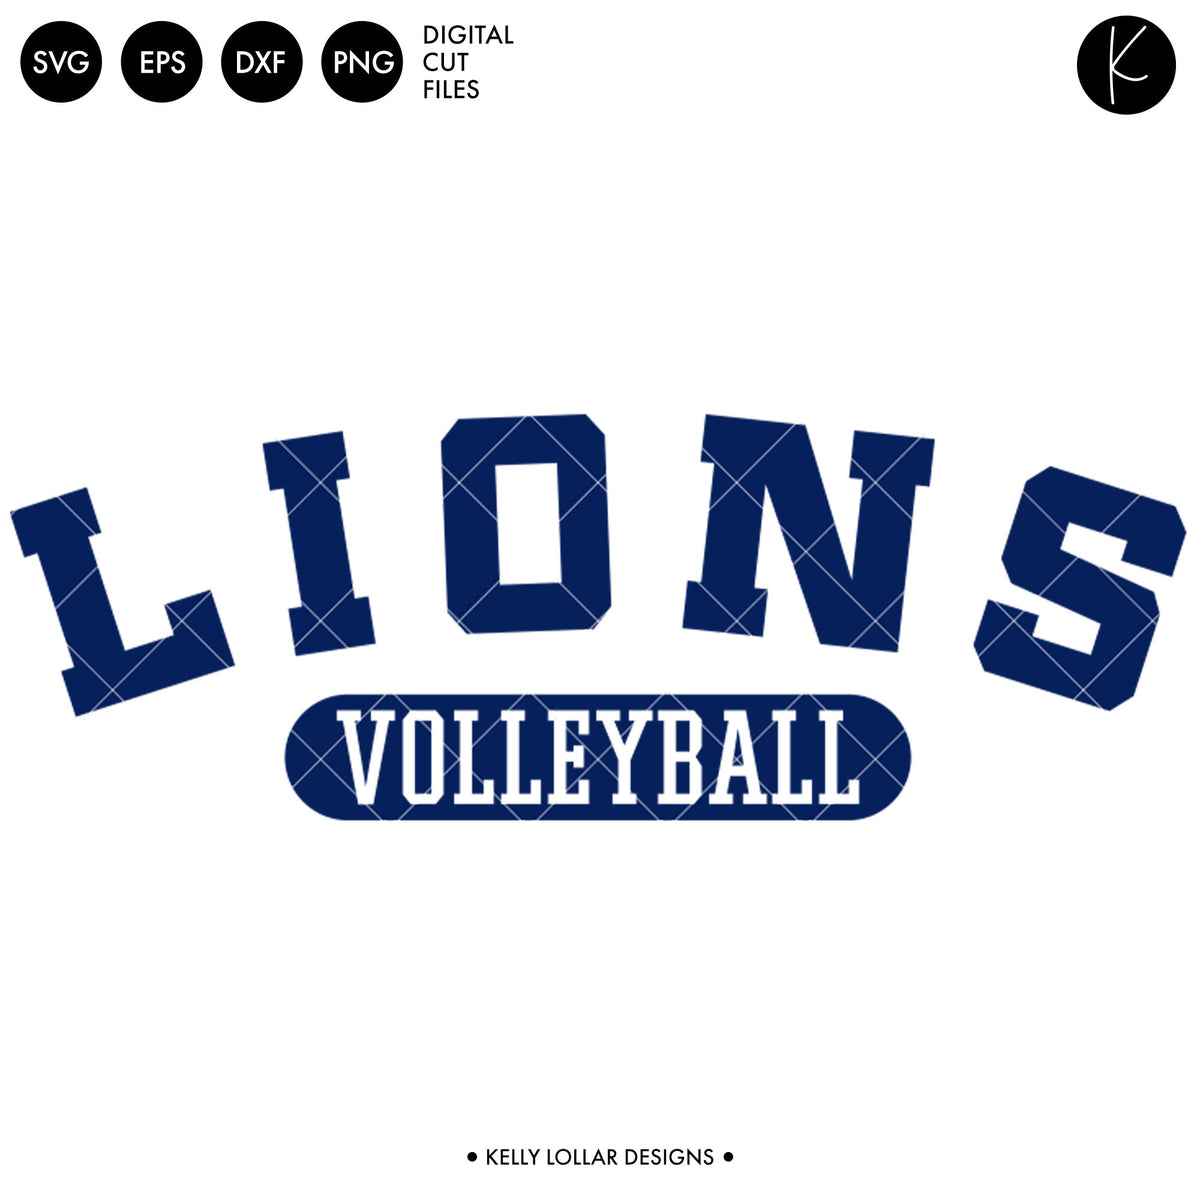 Lions Volleyball Bundle | SVG DXF EPS PNG Cut Files